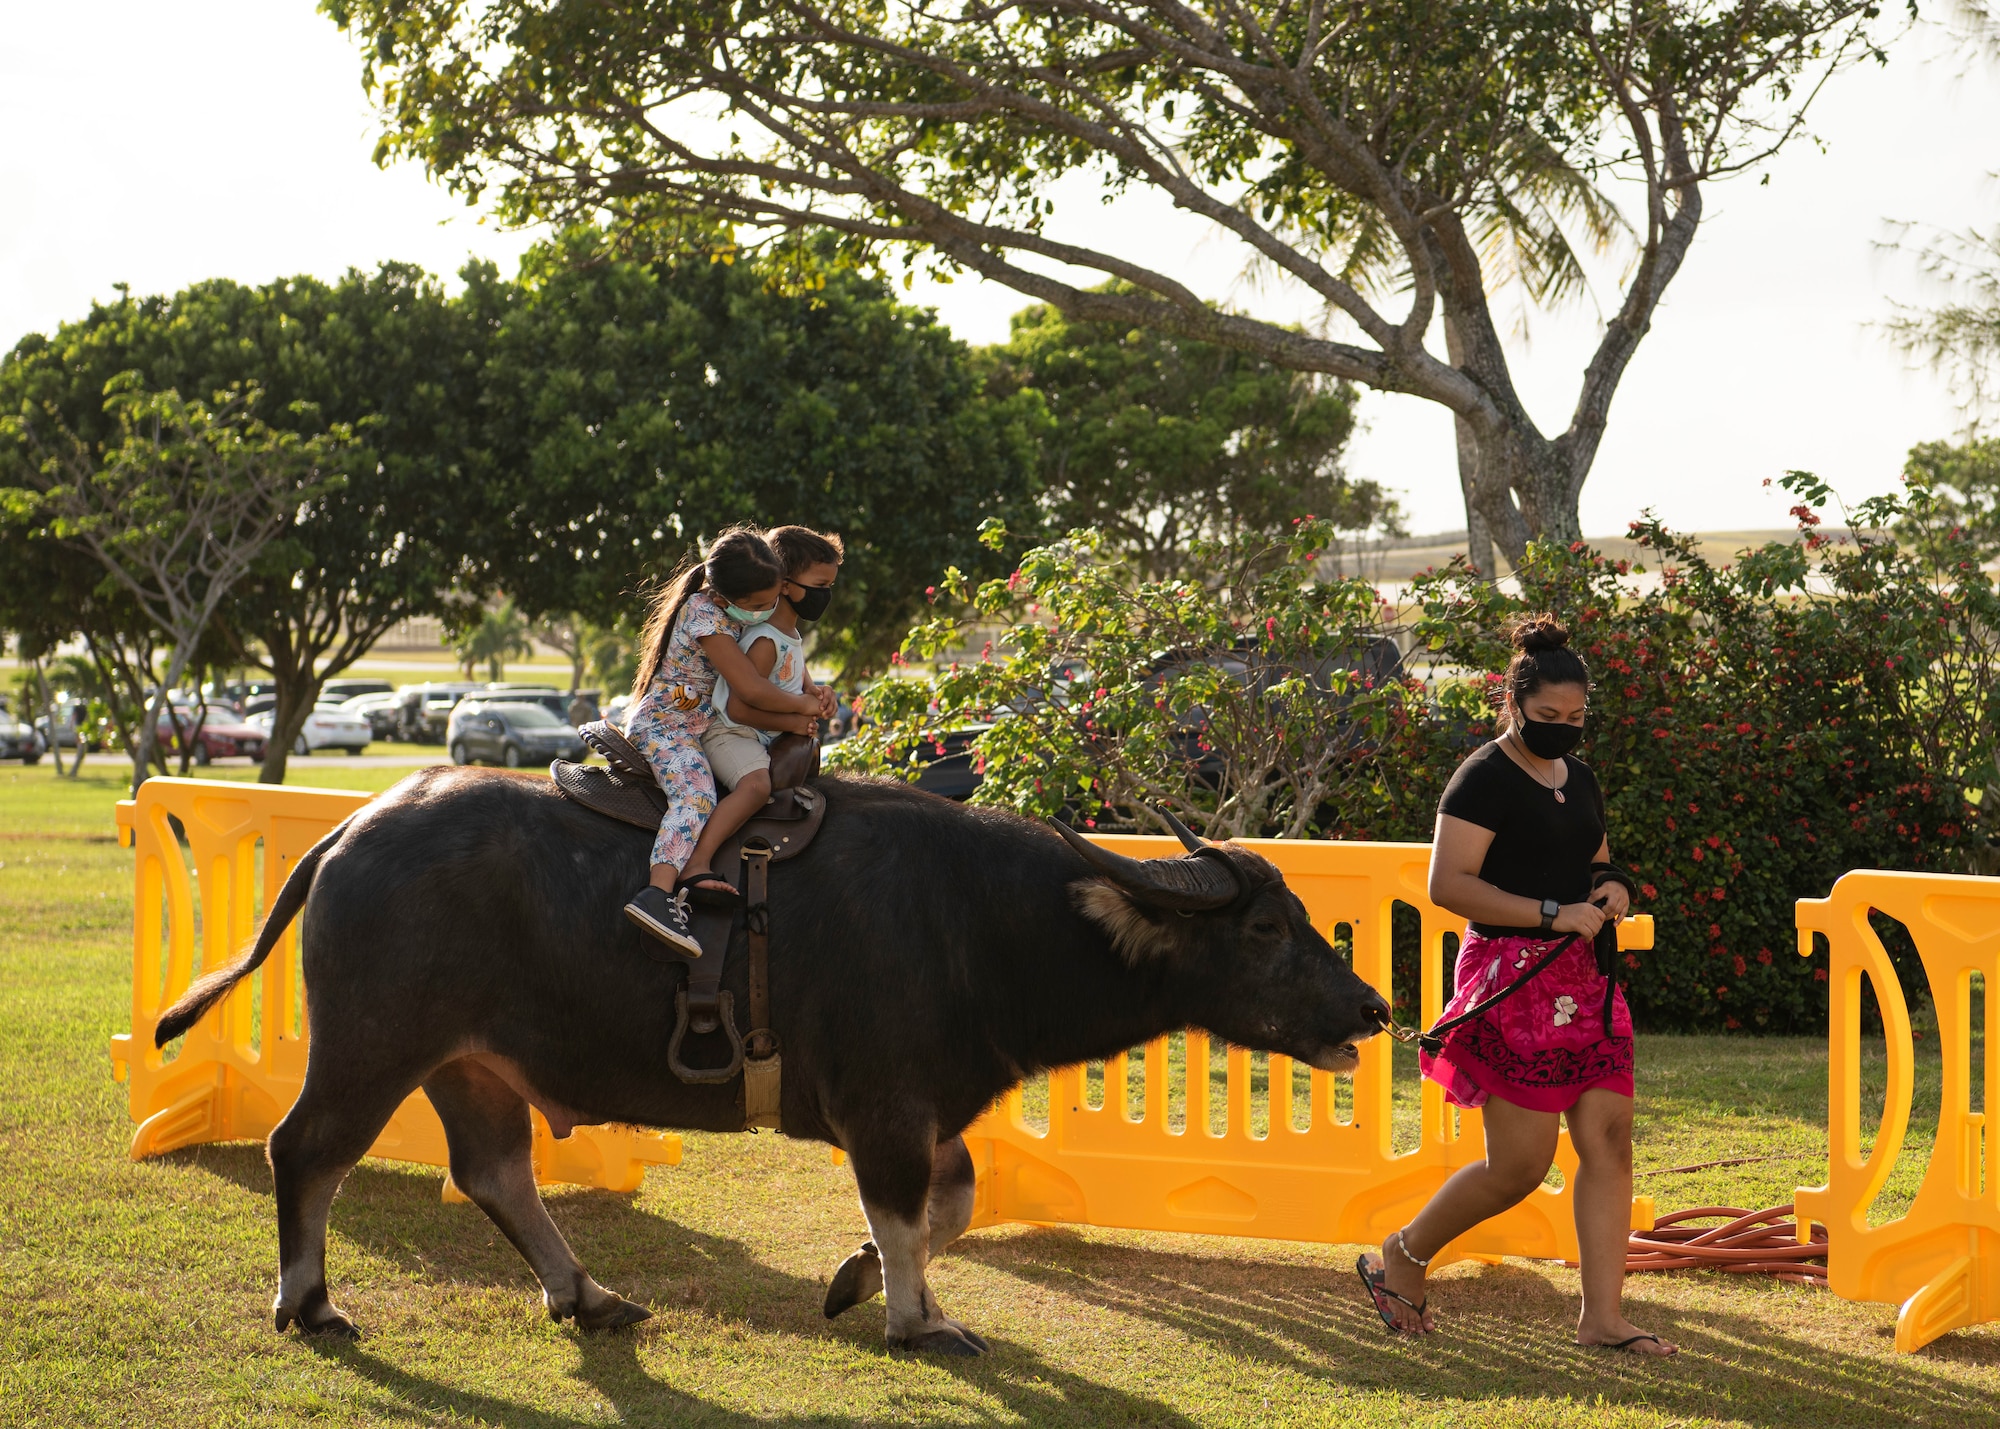 A guide leads a carabao ride for two children during the Tåotåo Guåhan event at Andersen Air Force Base, Guam, March 13, 2021. In honor of CHamoru Month, the Andersen AFB community hosted an event to celebrate the island’s indigenous culture and heritage with members of the base and local residents in attendance. (U.S. Air Force photo by Senior Airman Aubree Owens)